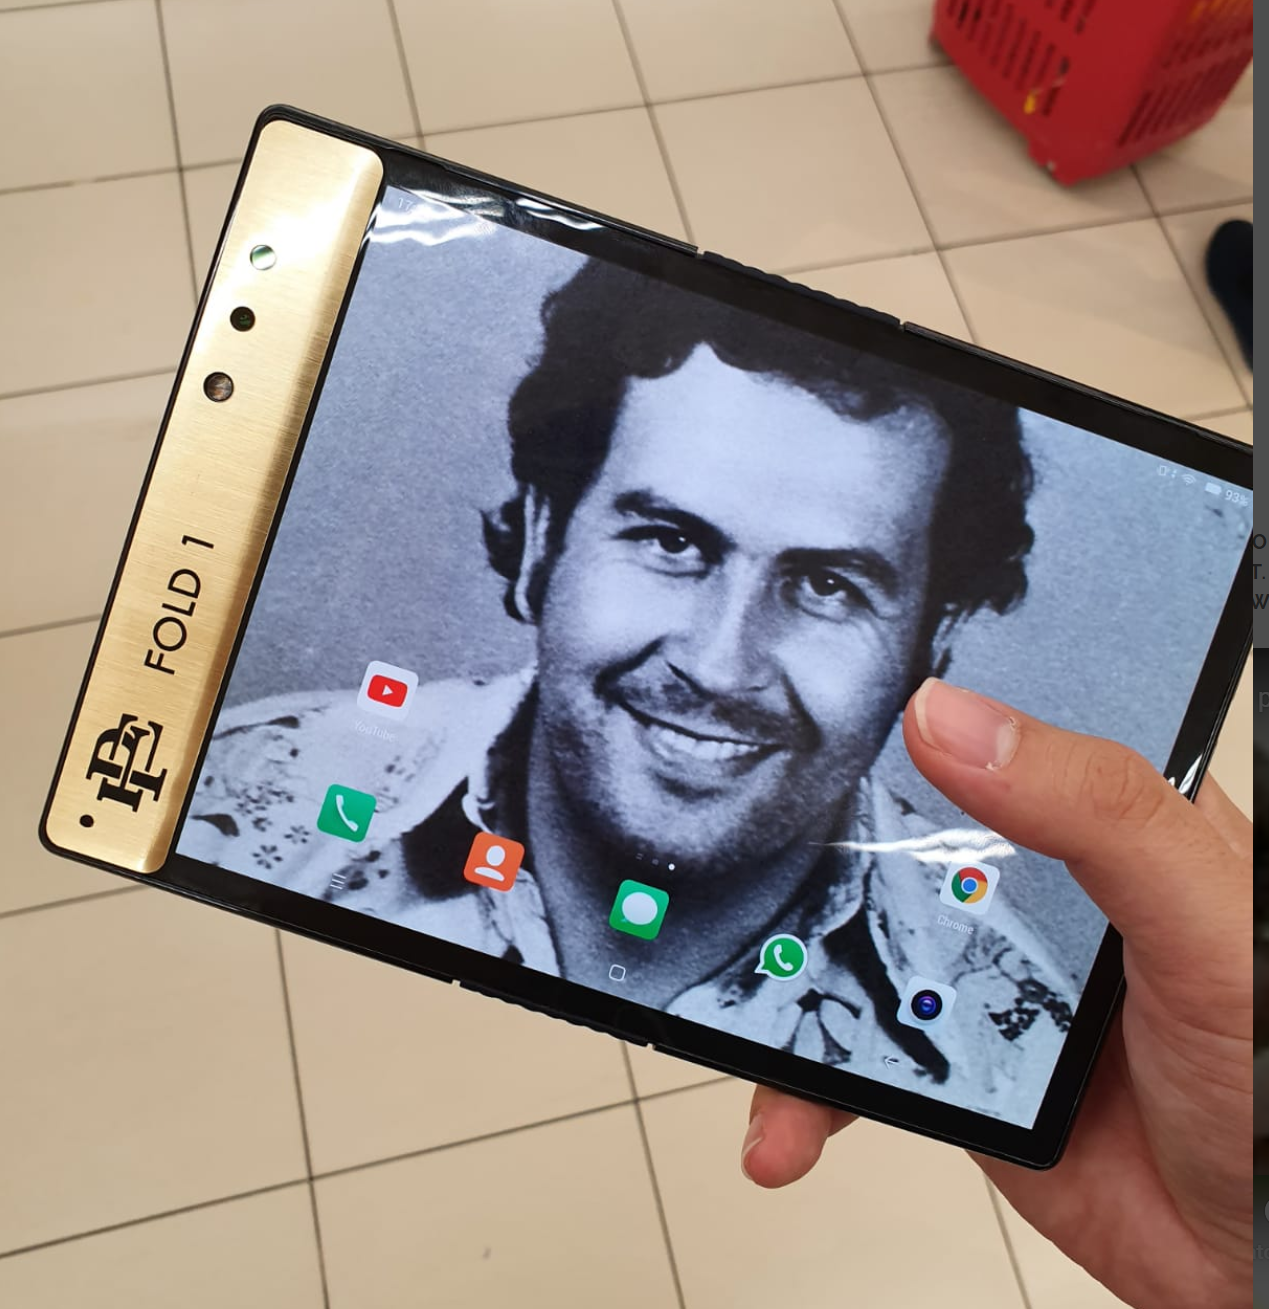 Pablo Escobar's launches $349 1 - NotebookCheck.net News